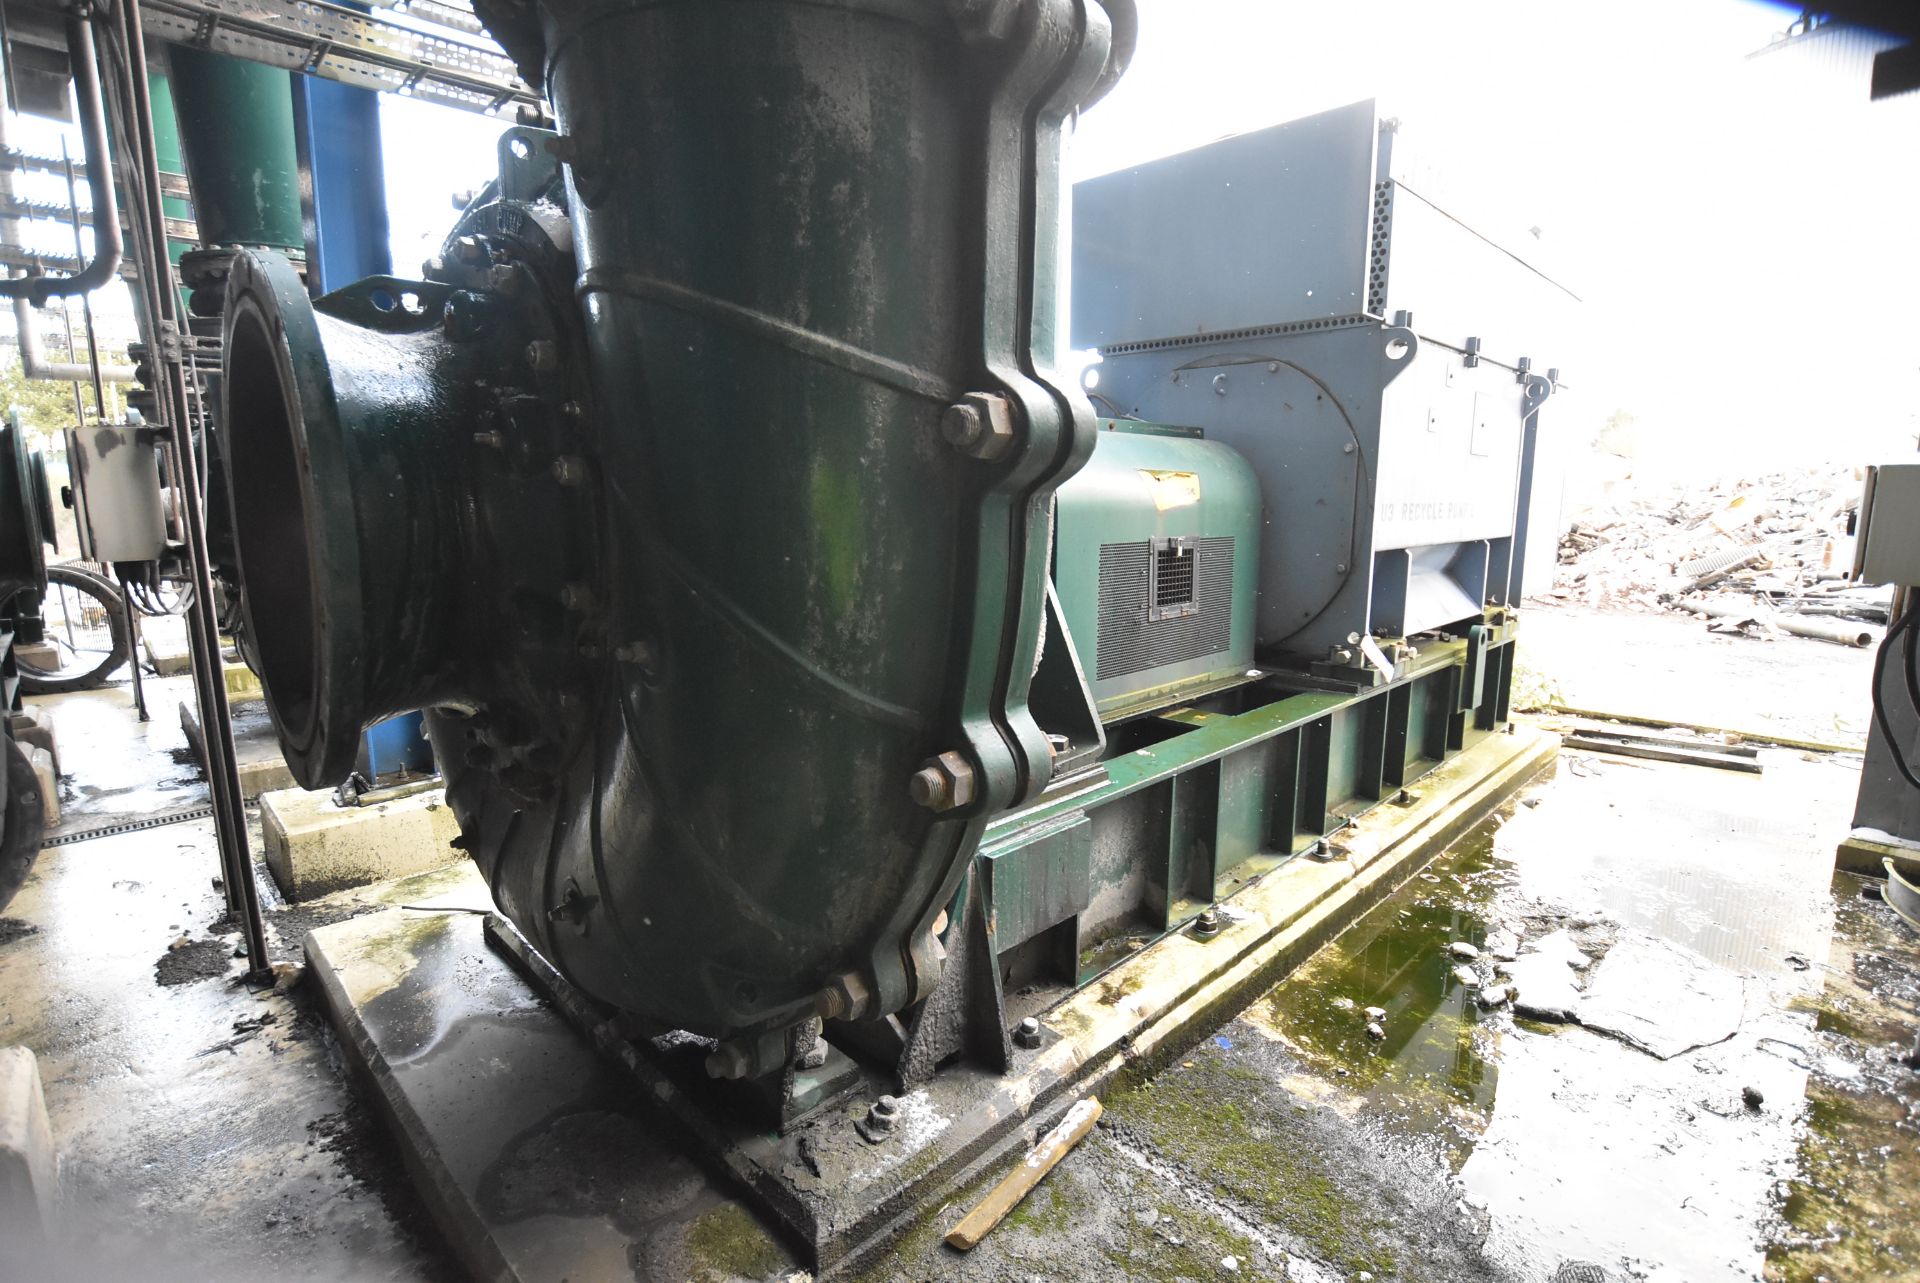 Warman 700GSL CENTRIFUGAL PUMP, approx. 800mm dia. delivery, size 700, design capacity 2691 - Image 4 of 8